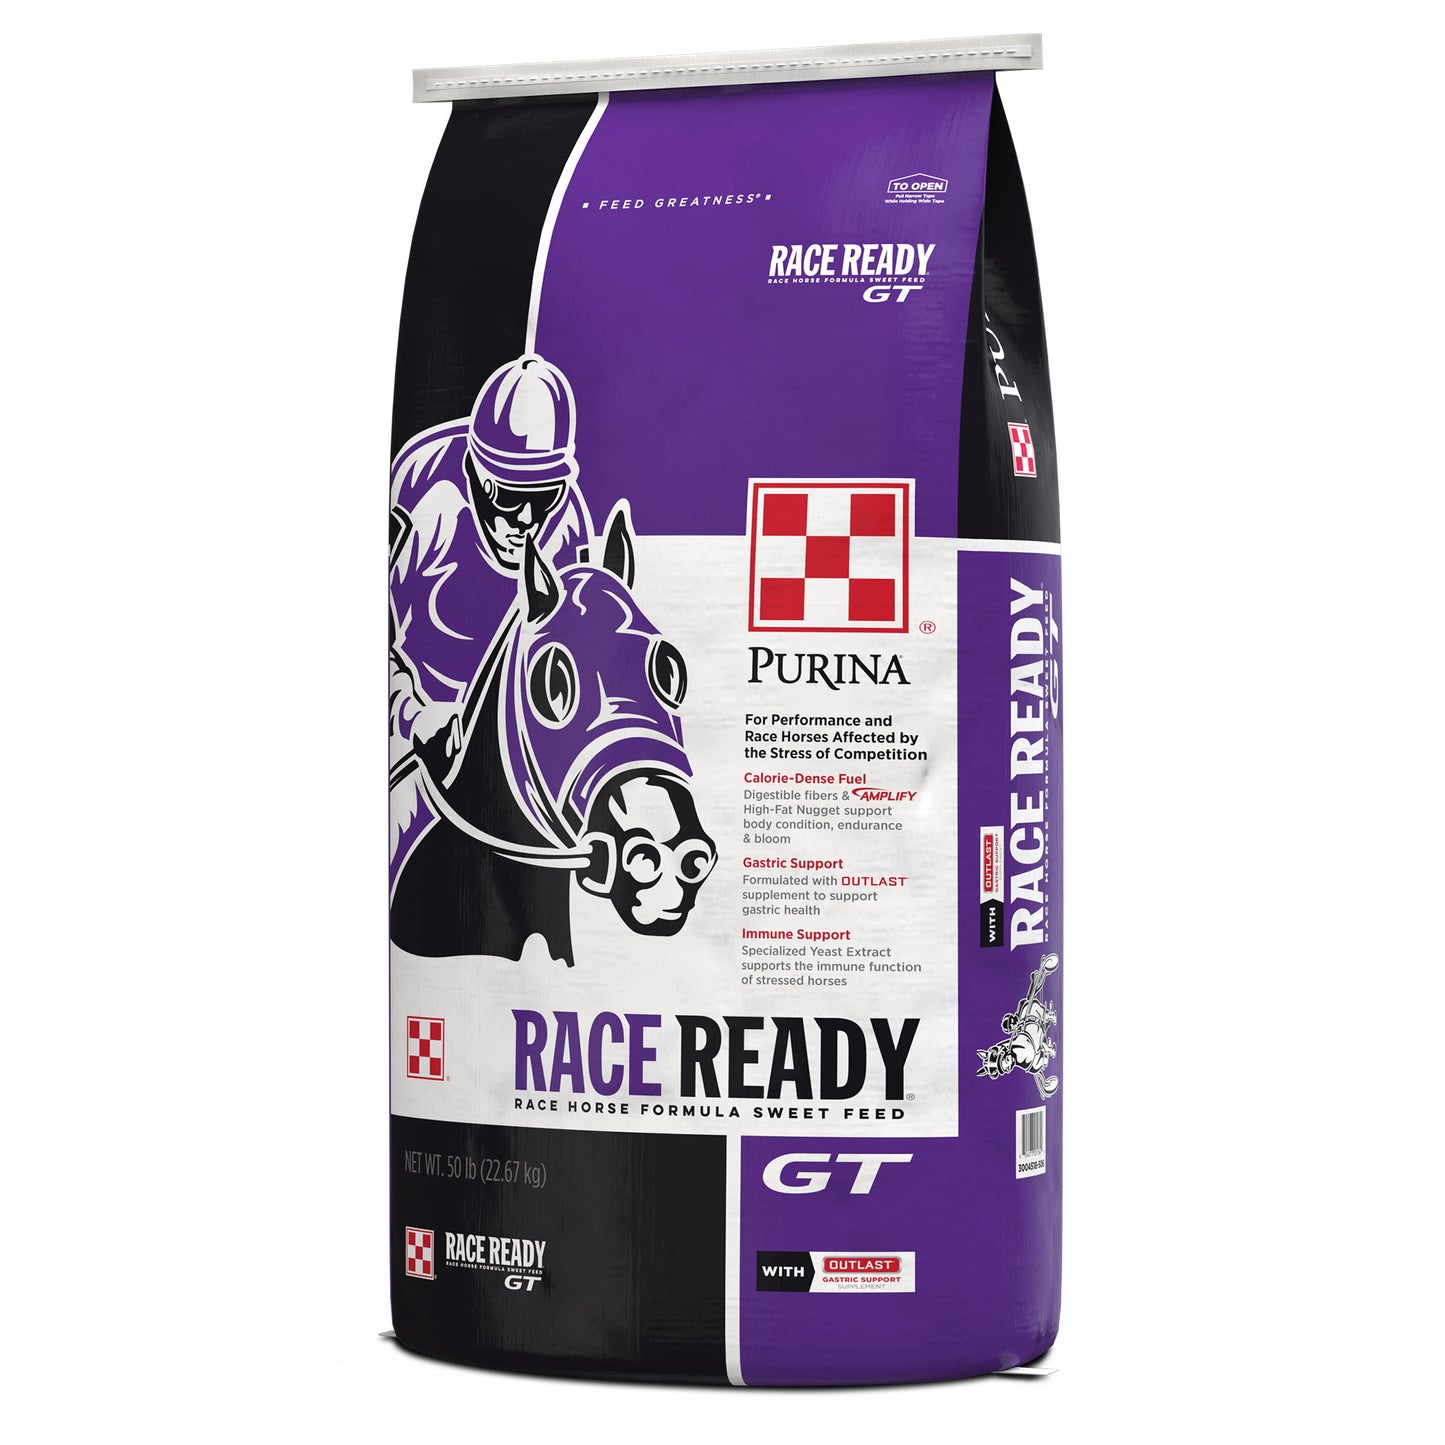 Right Angle of Purina Race Ready GT Bag